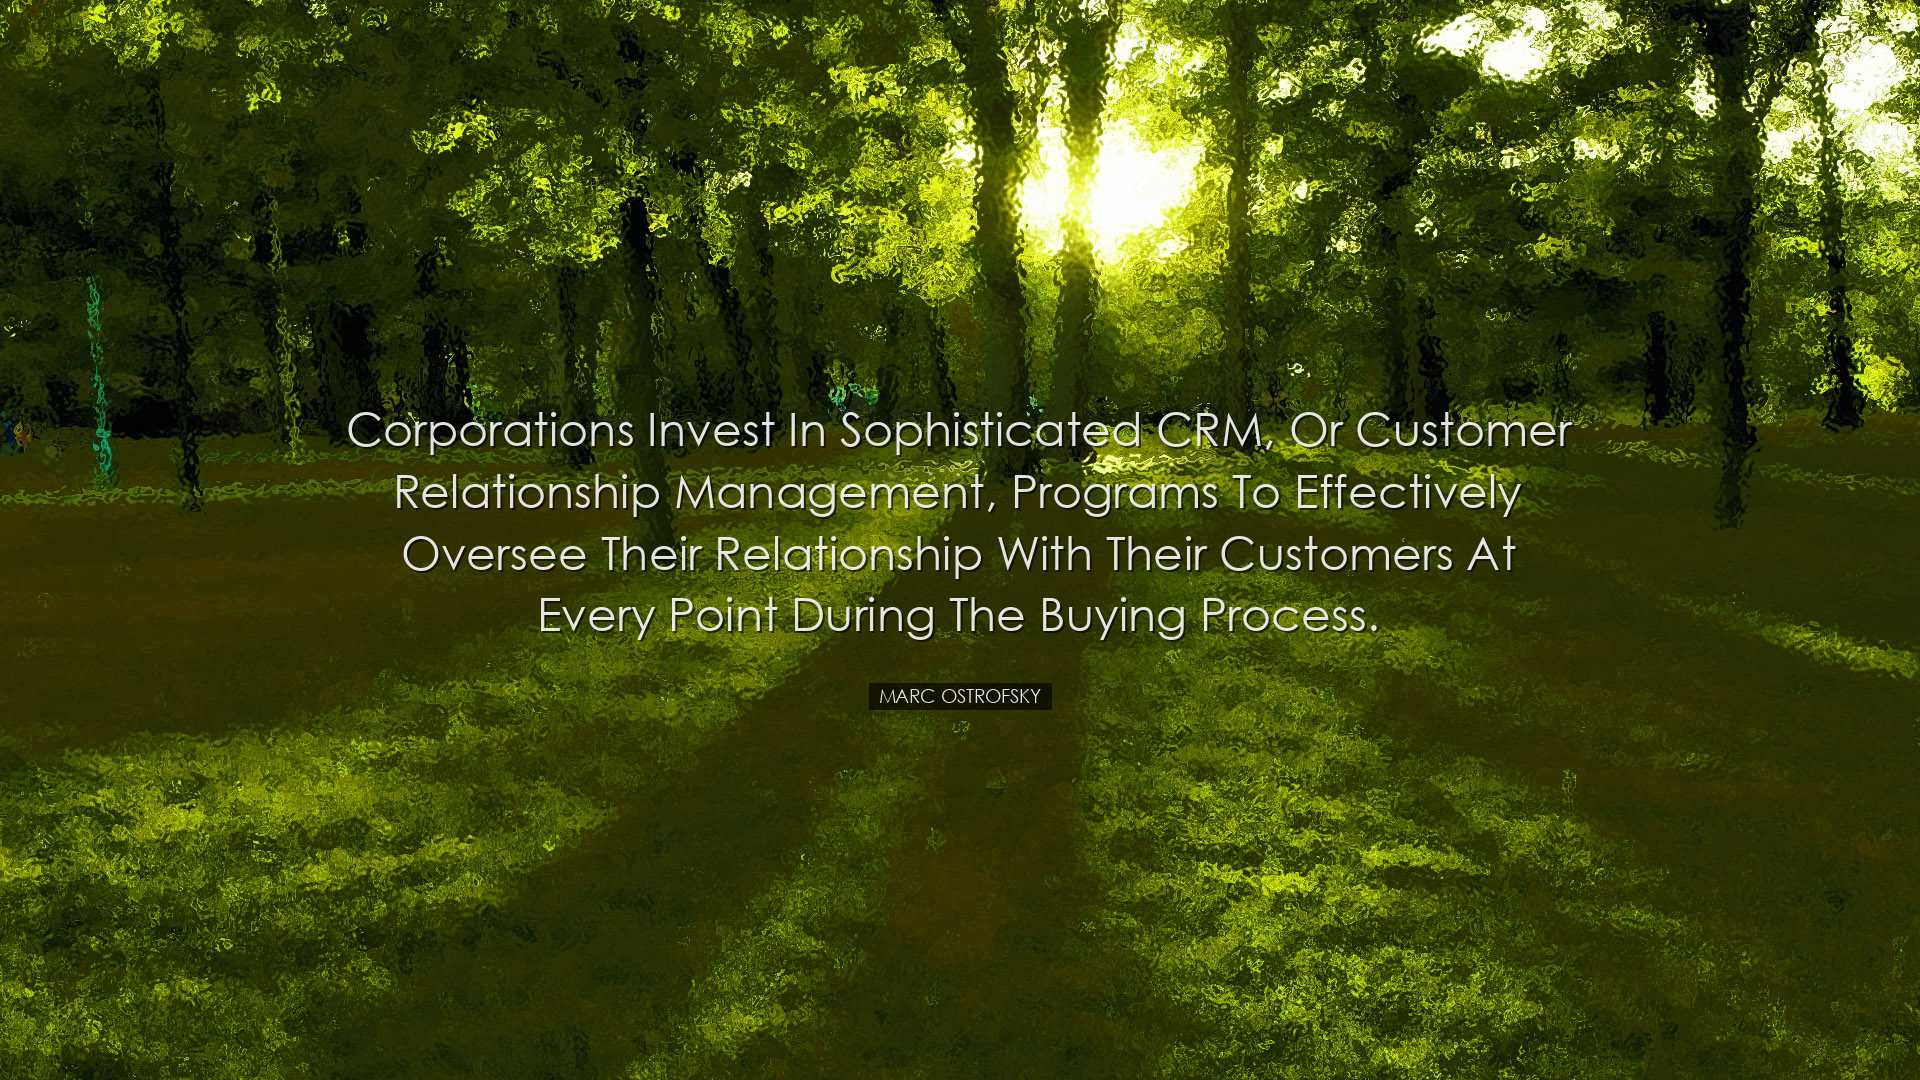 Corporations invest in sophisticated CRM, or Customer Relationship